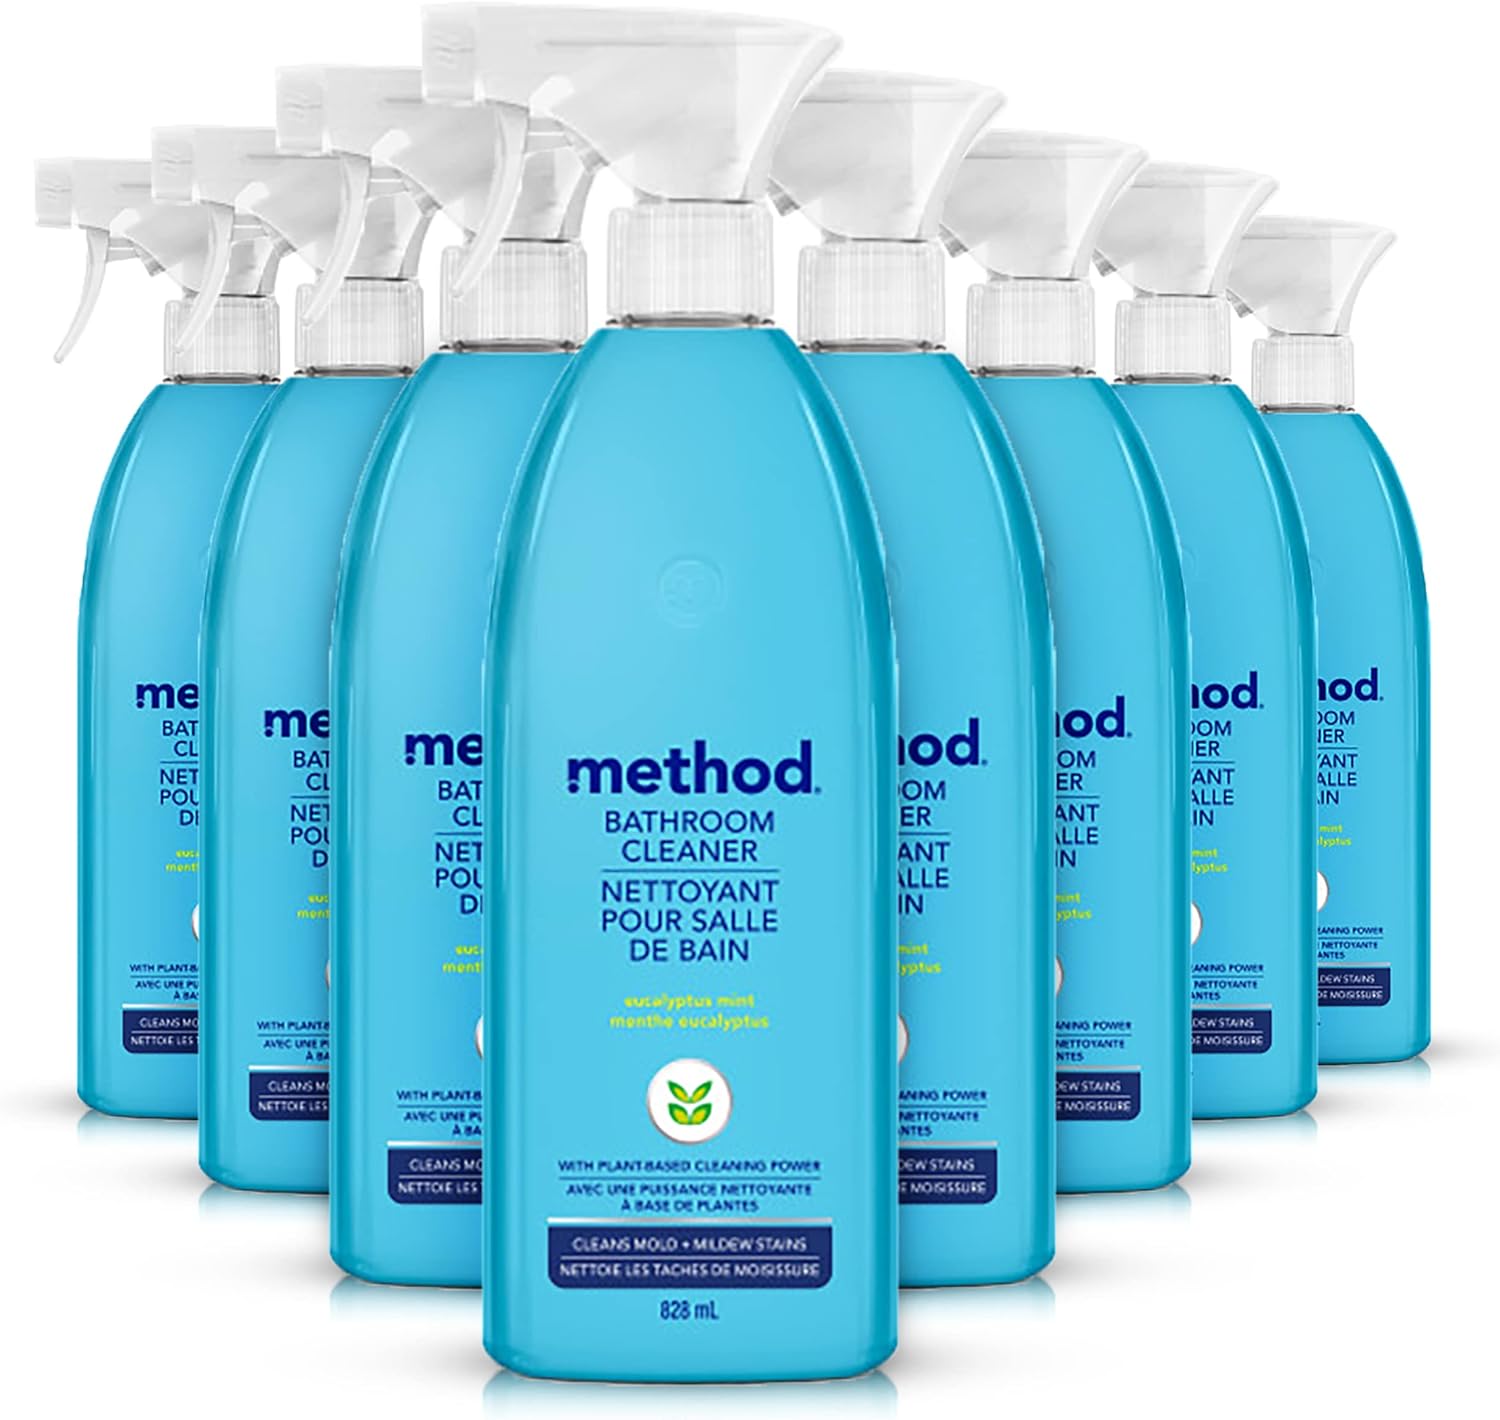 Method Bathroom Cleaner, Mint, 28 Fl Oz (Pack of 8) with 15% s&s $18.02 ($20.14 w/ 5% S&S)